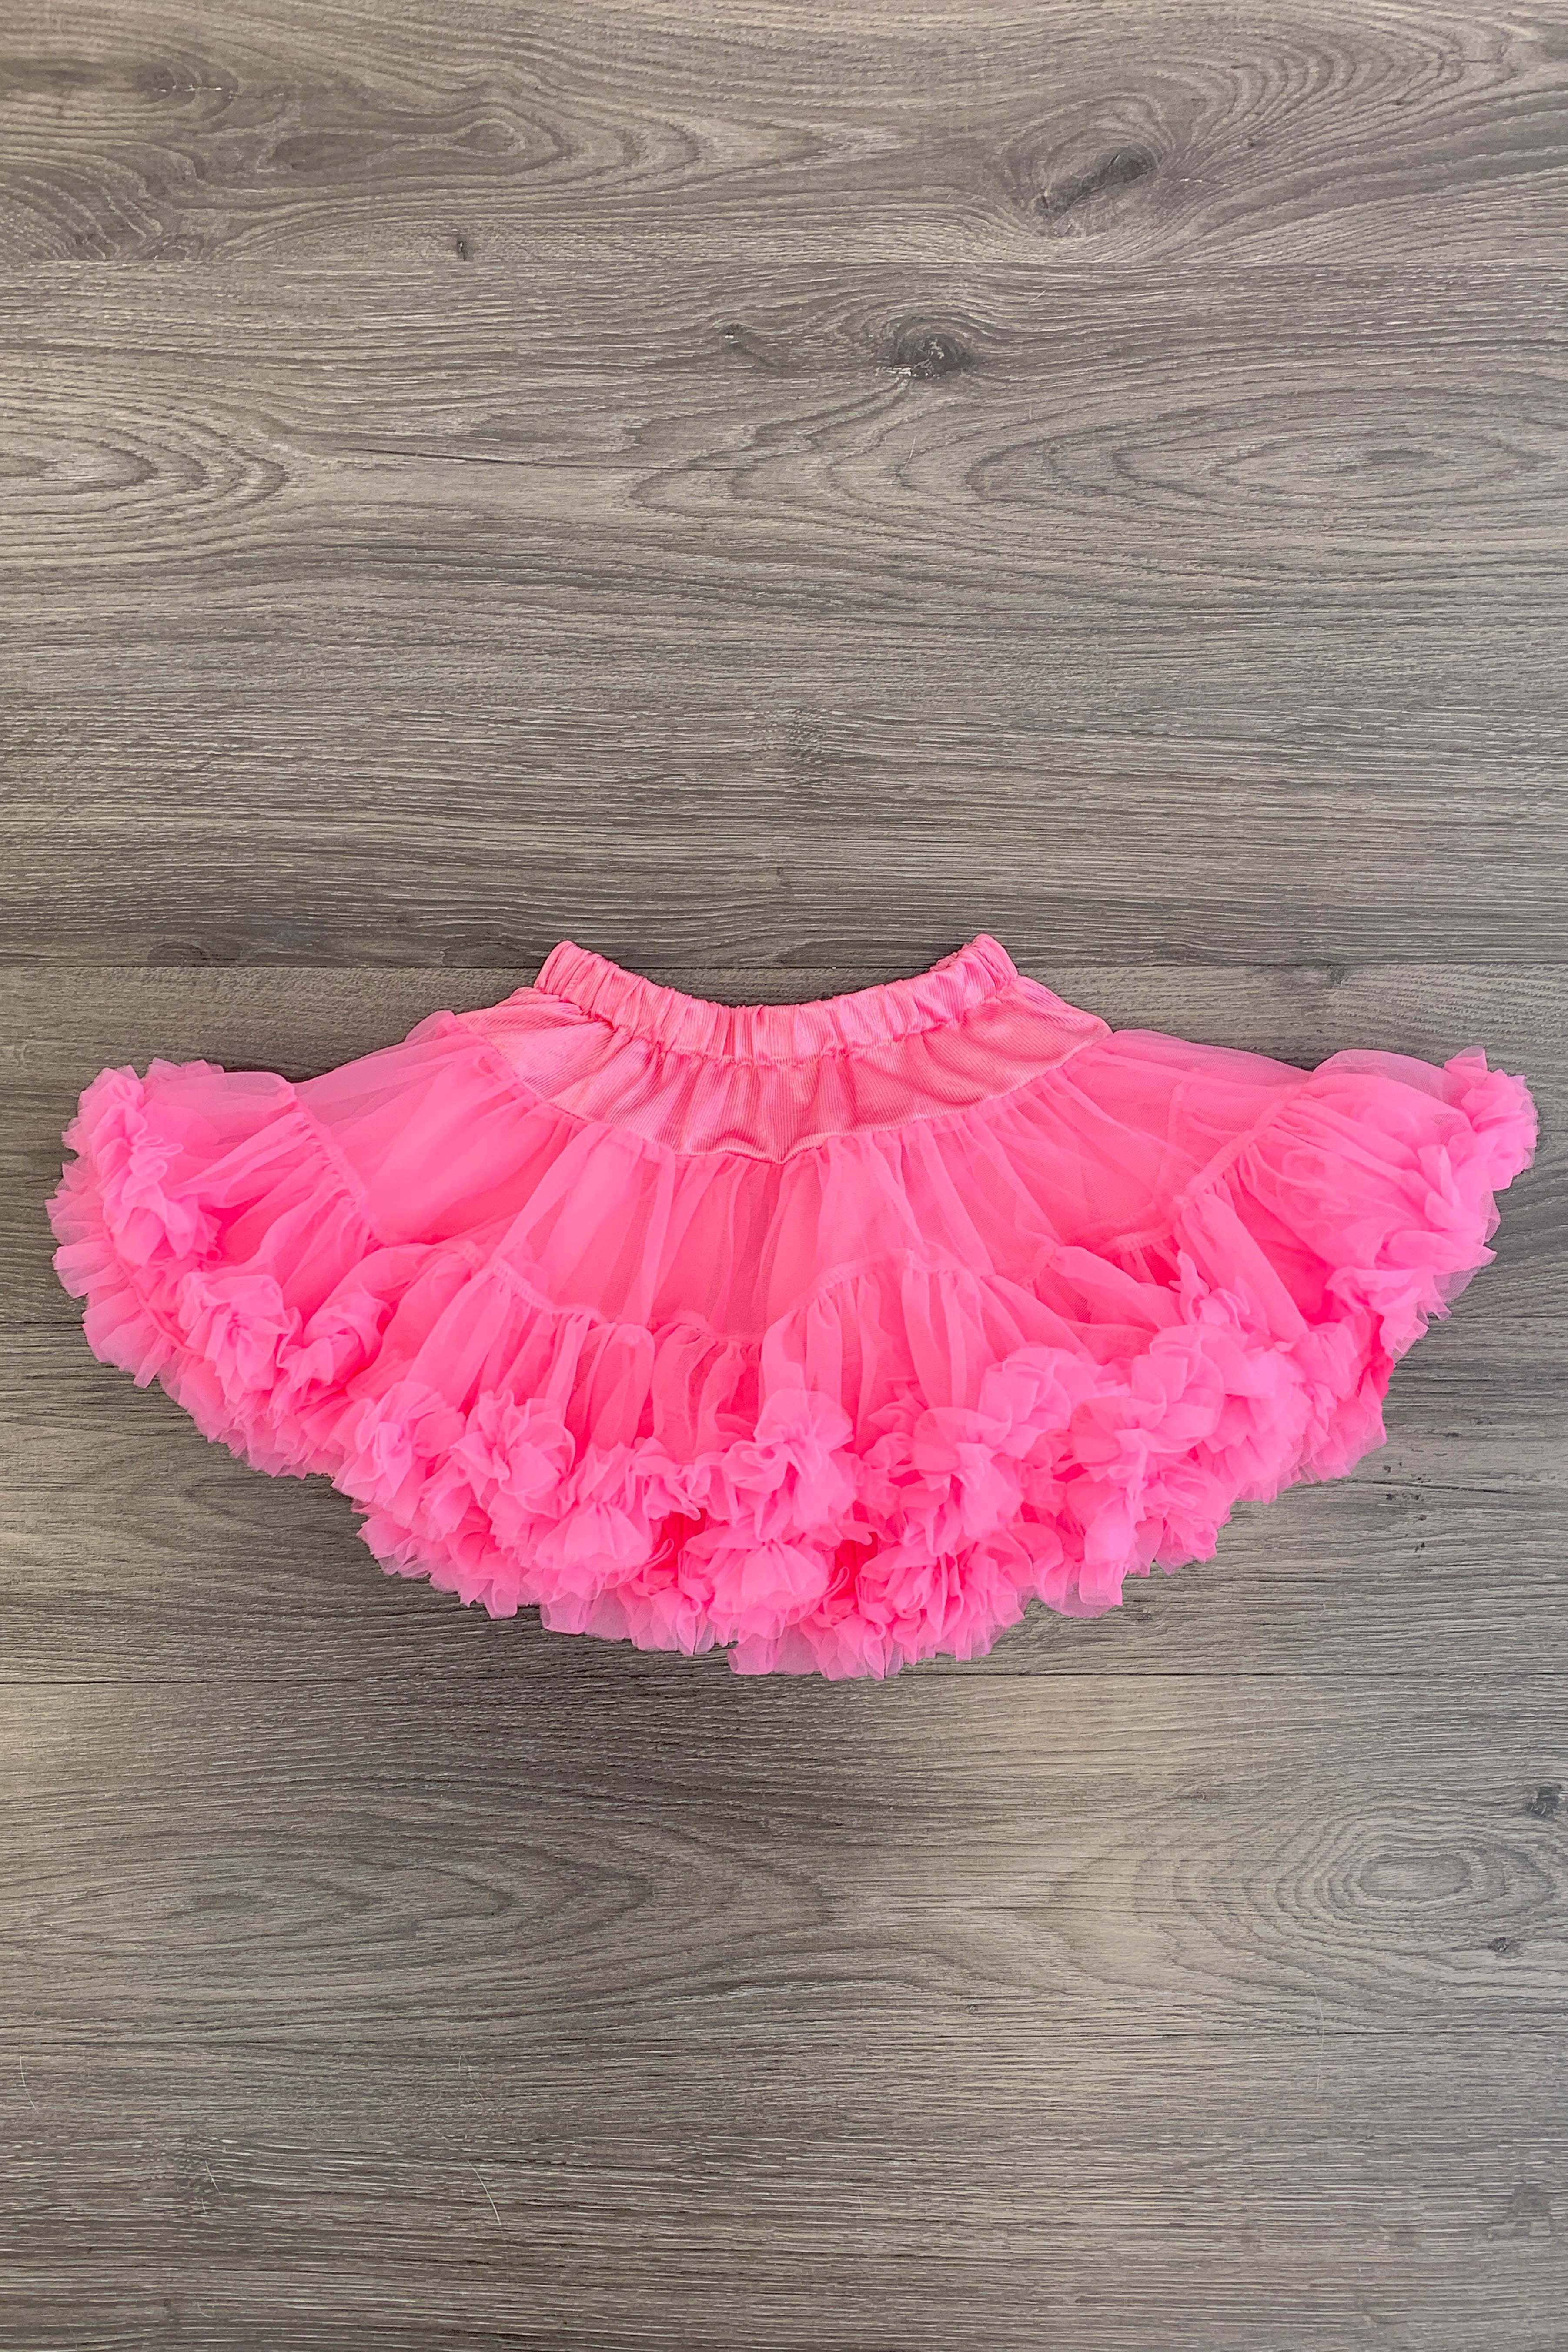 Deluxe Chiffon Pettiskirt- PINK | Sparkle In Pink